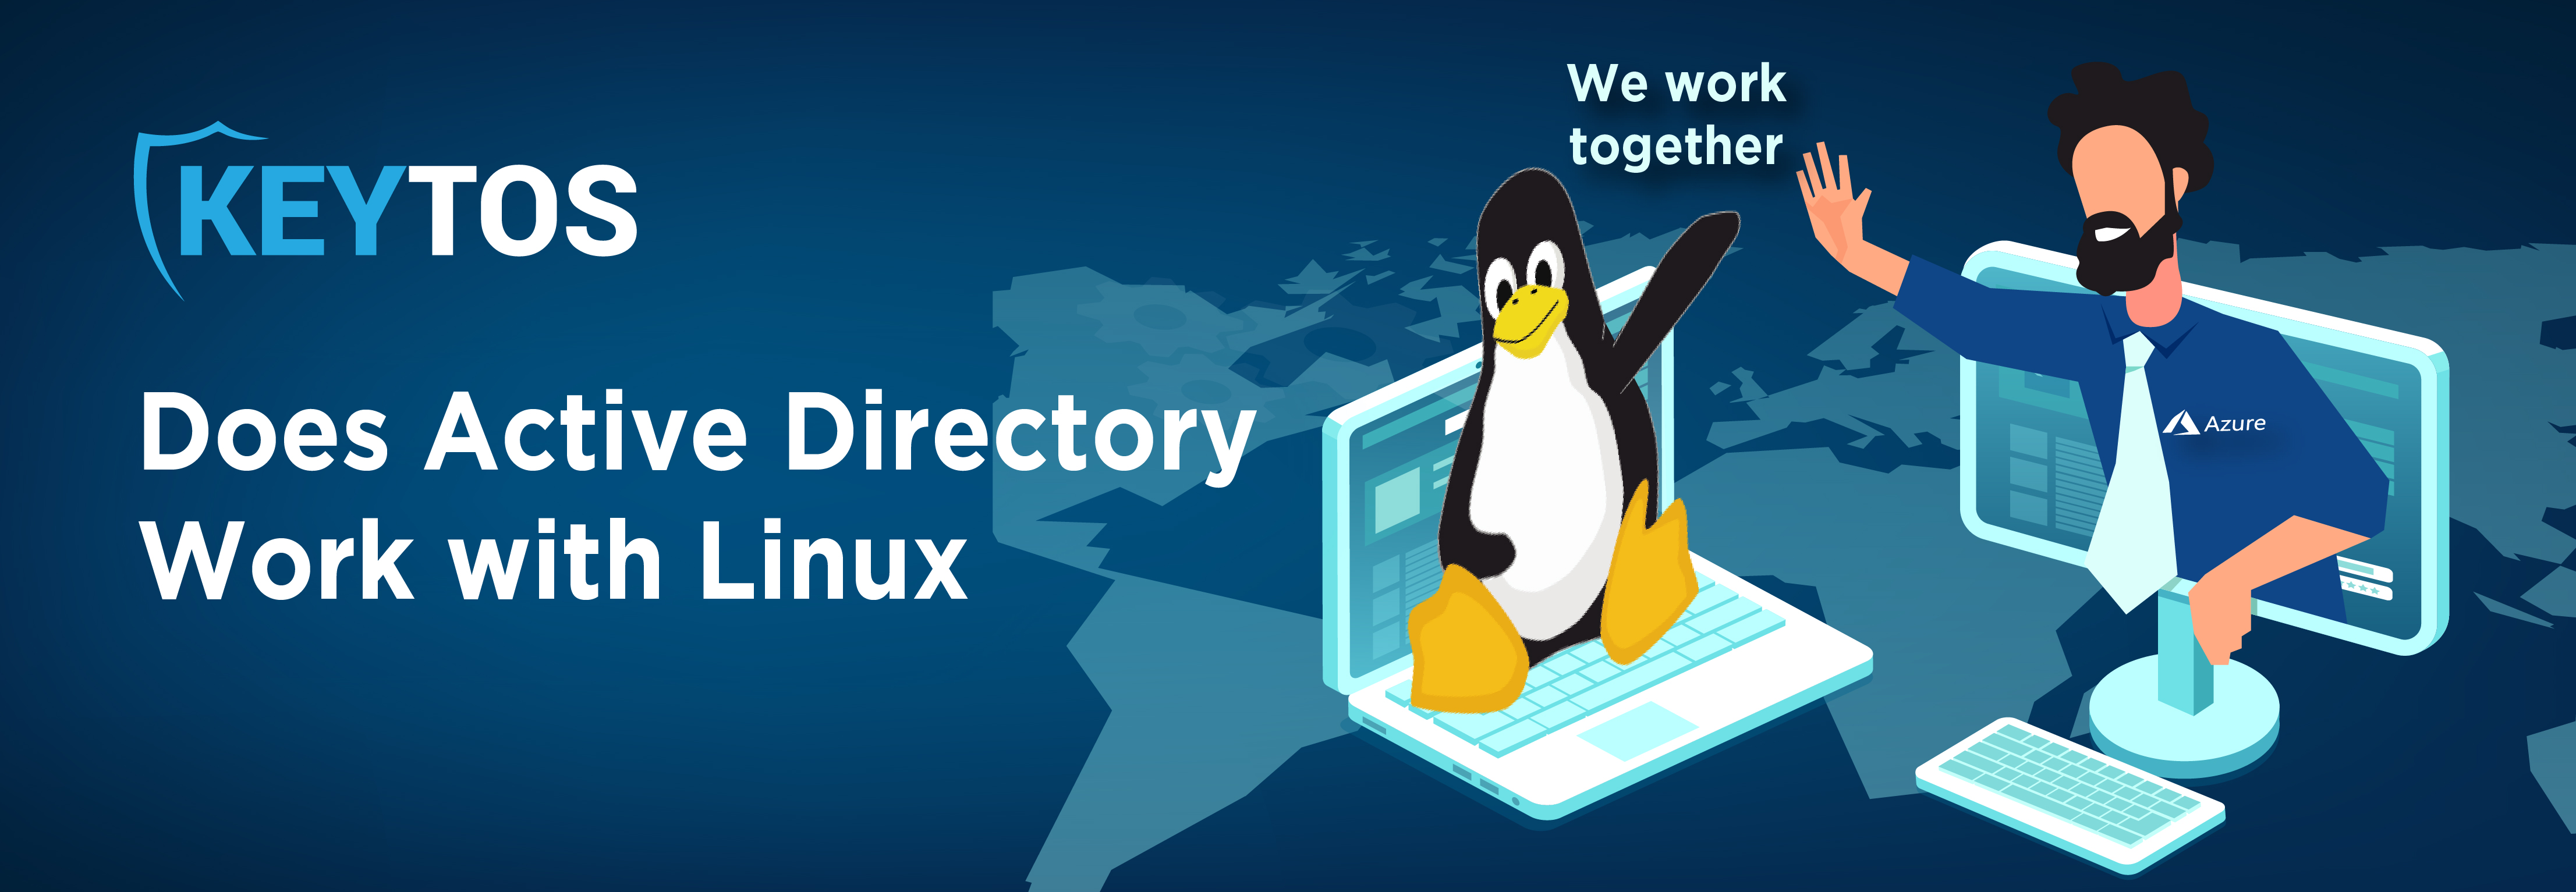 Does Microsoft Active Directory Work With Linux?